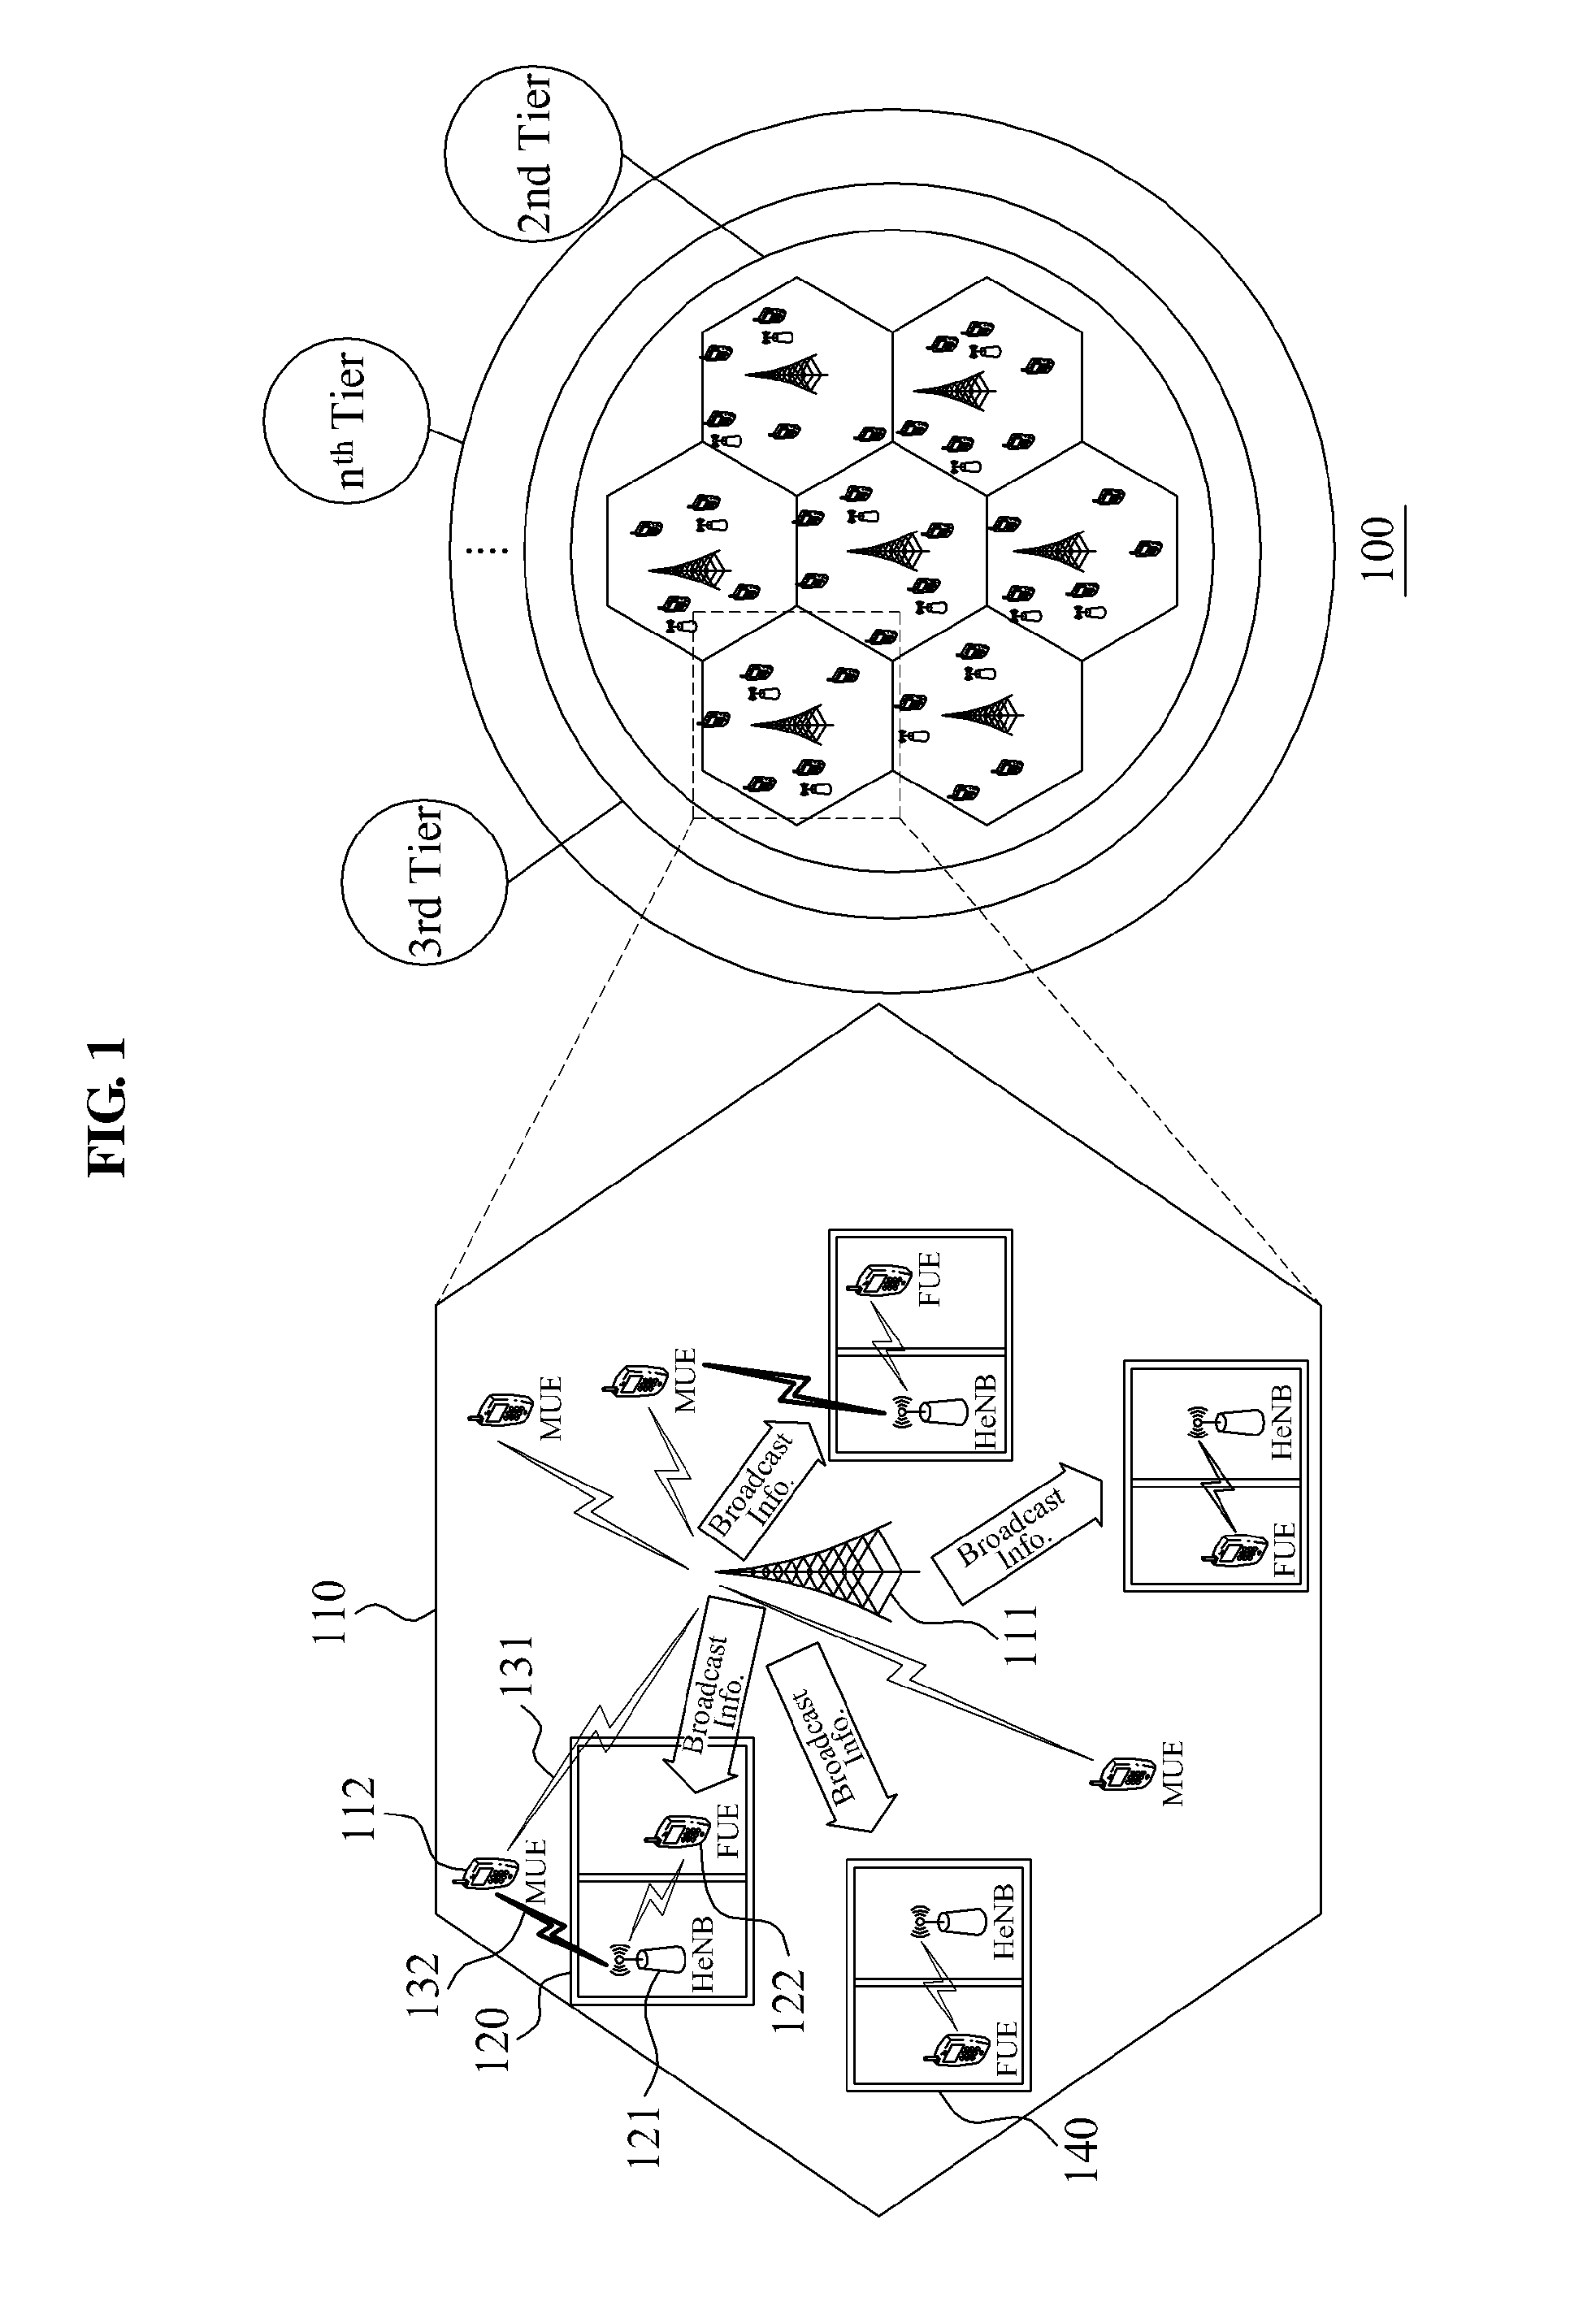 System and method to mitigate interference of 3gpp LTE heterogeneous network according to priority of service